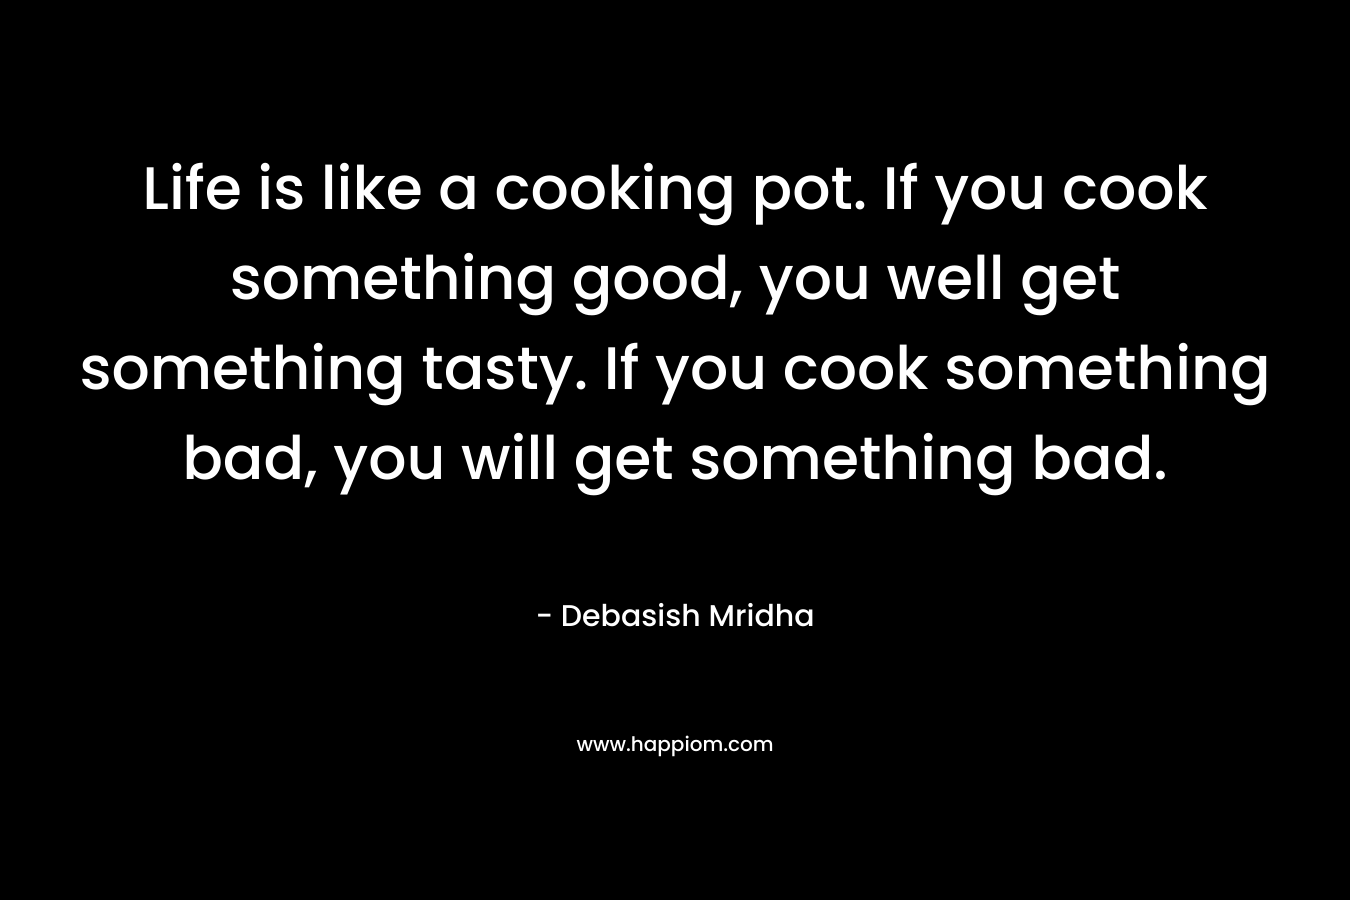 Life is like a cooking pot. If you cook something good, you well get something tasty. If you cook something bad, you will get something bad. – Debasish Mridha